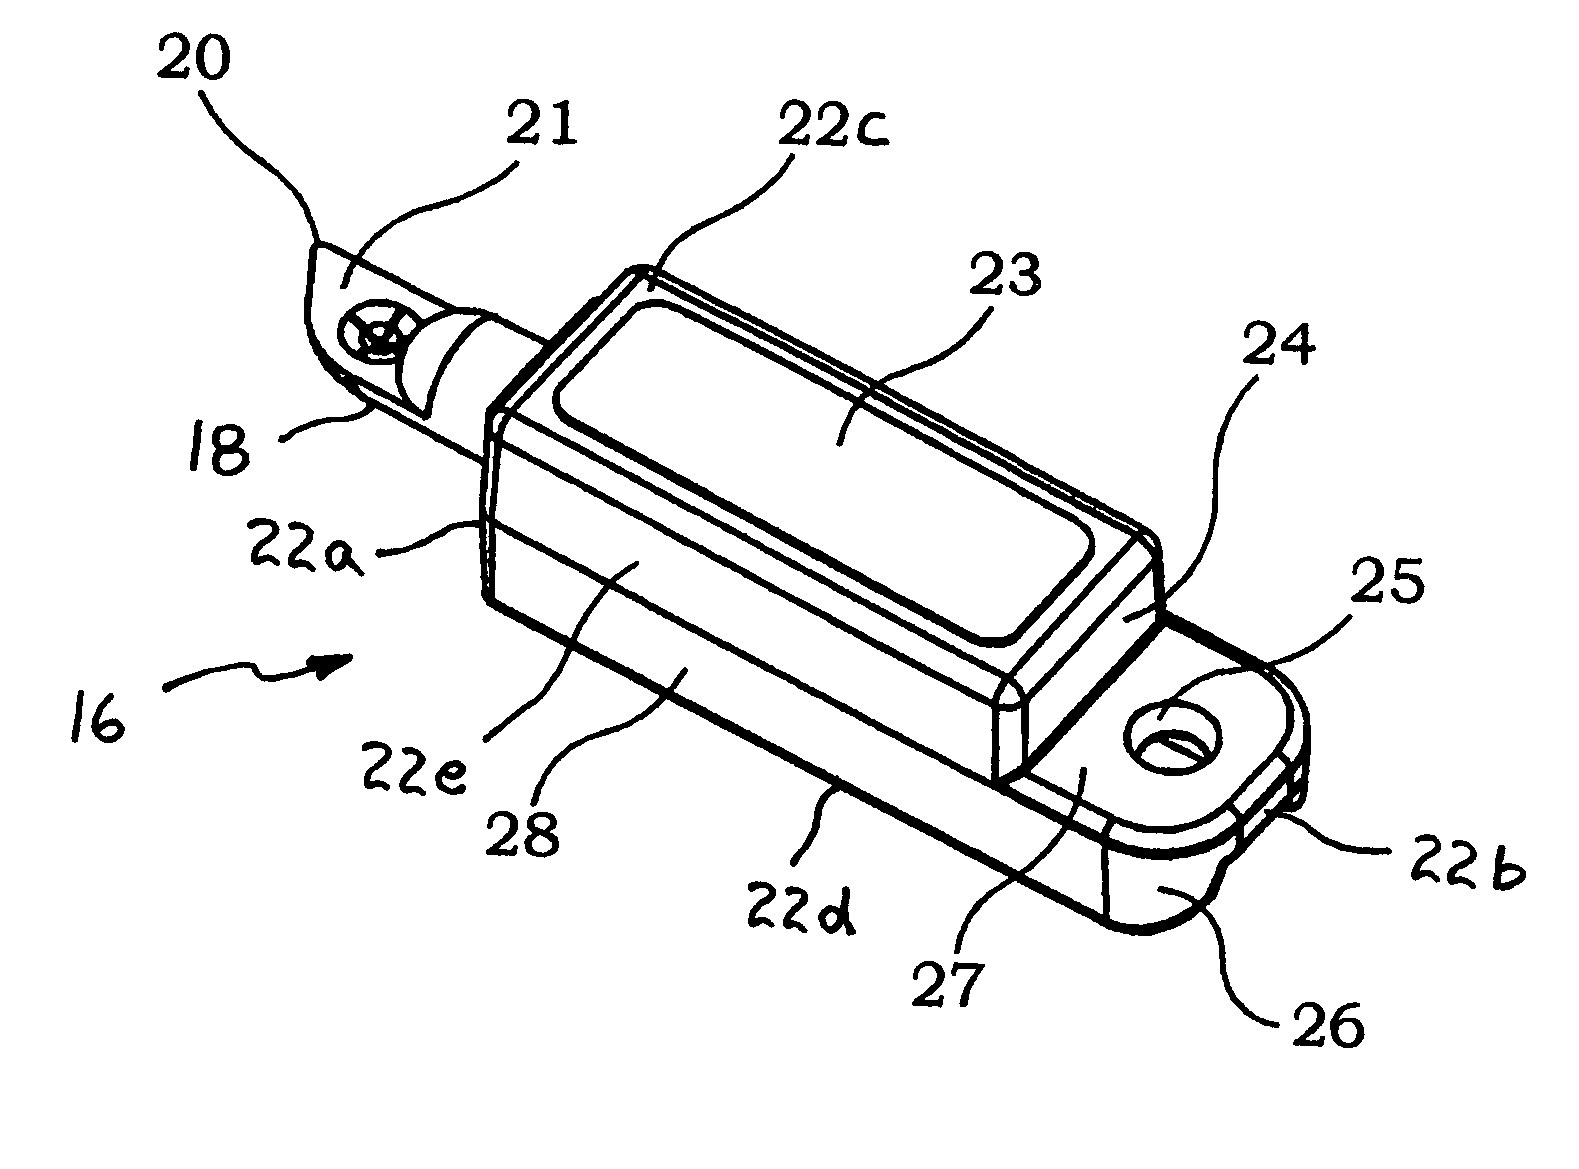 Hand-held tool for piercing and scraping